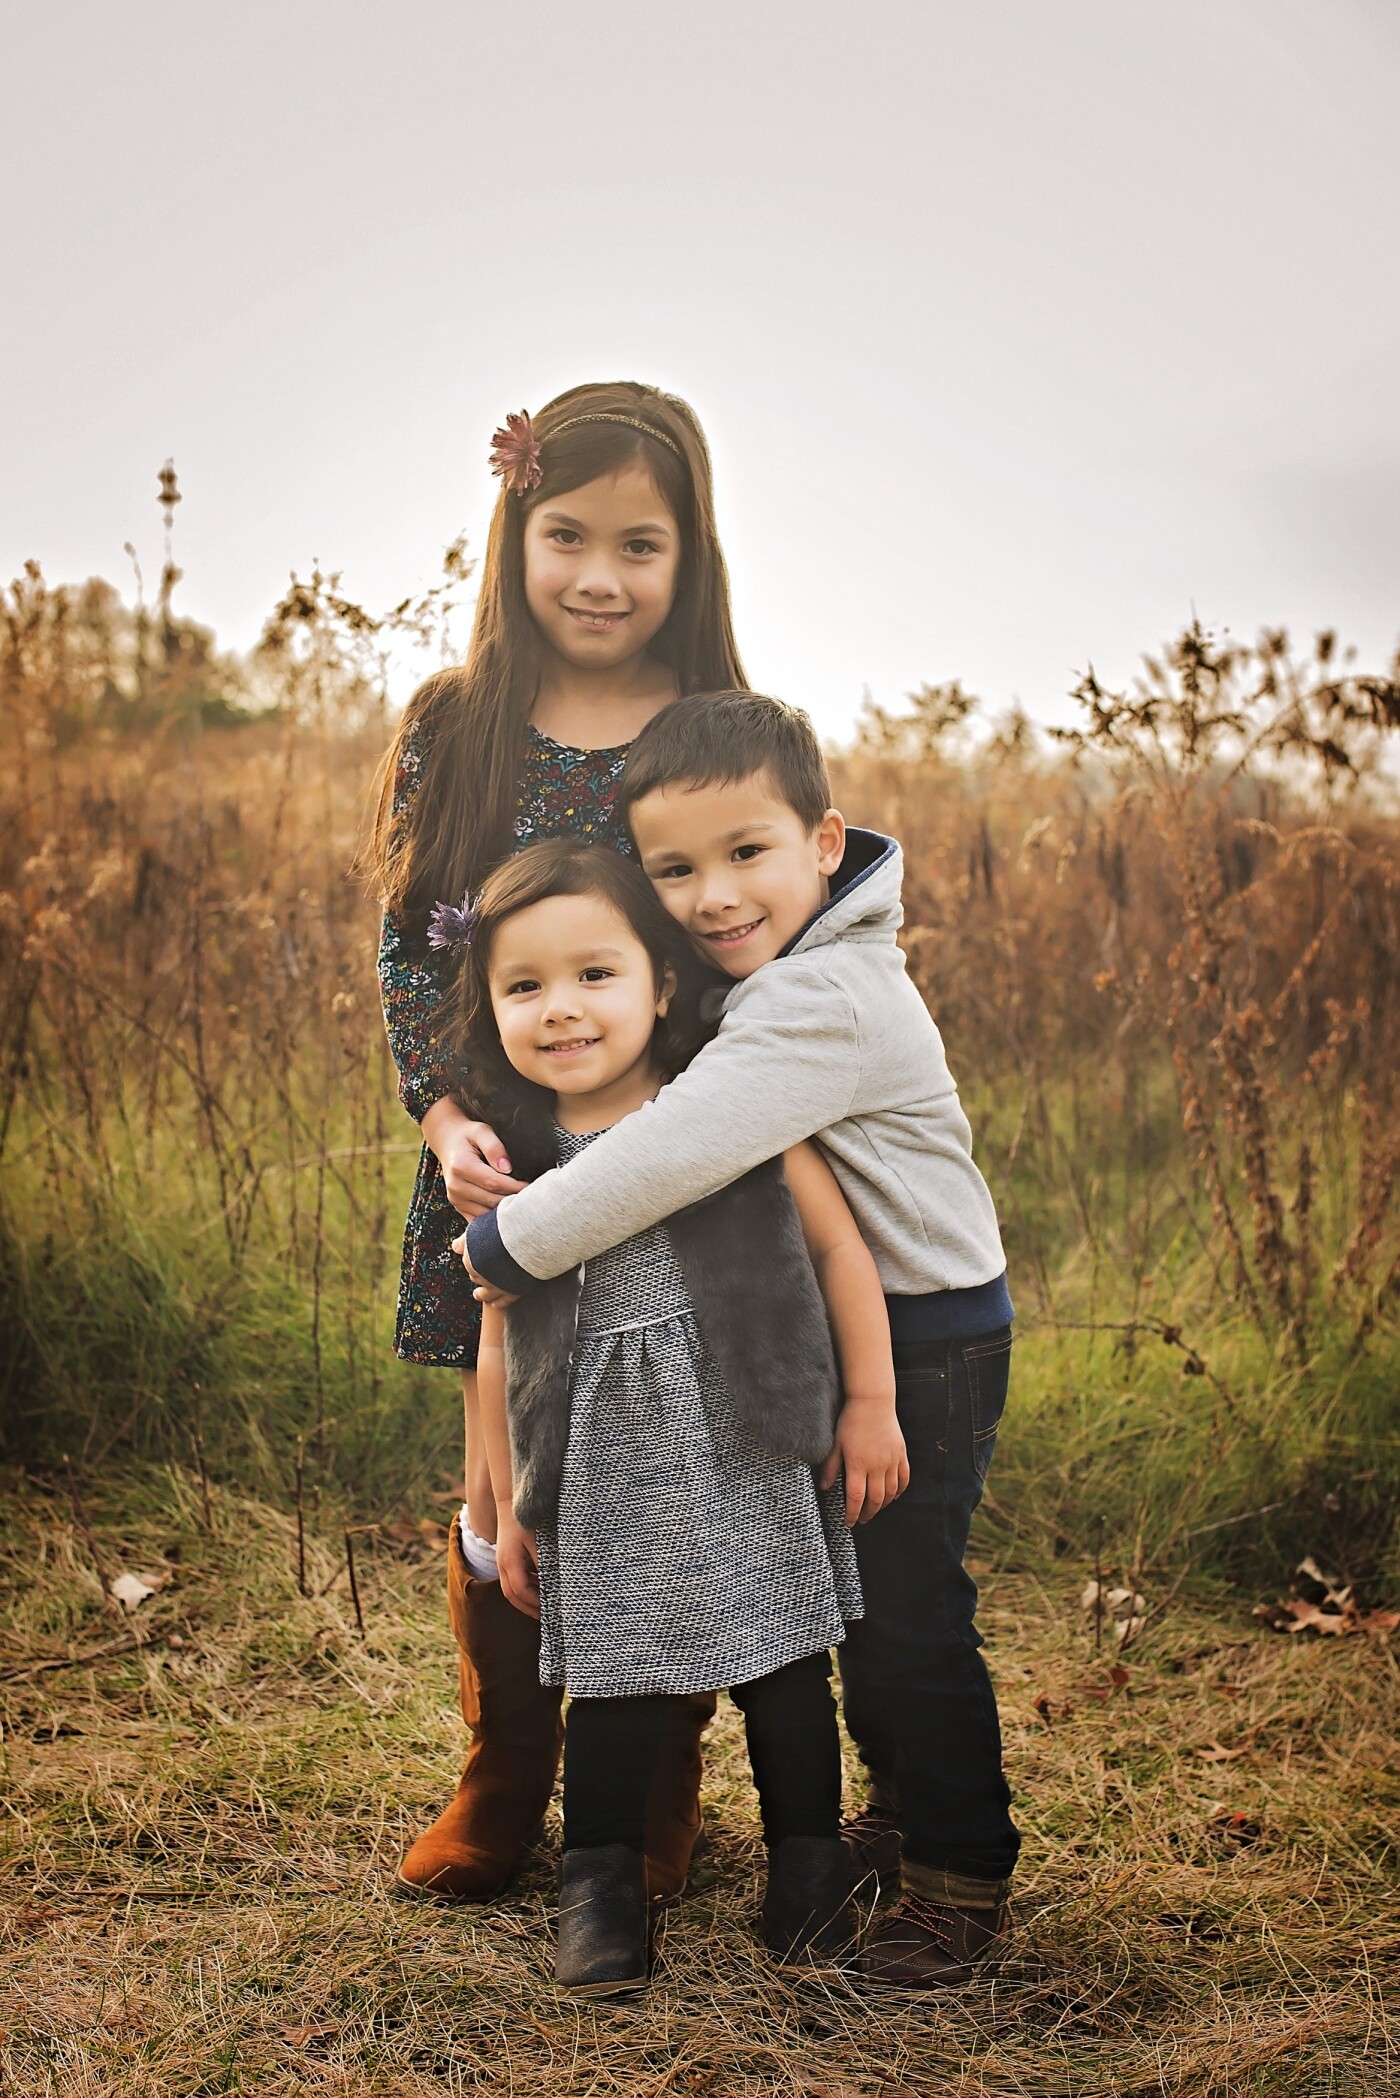 These three were adorable.  When it came time for their photos together during their family session, they went into this hug naturally.  You can see the love they feel for each other and that is what I strive to capture.